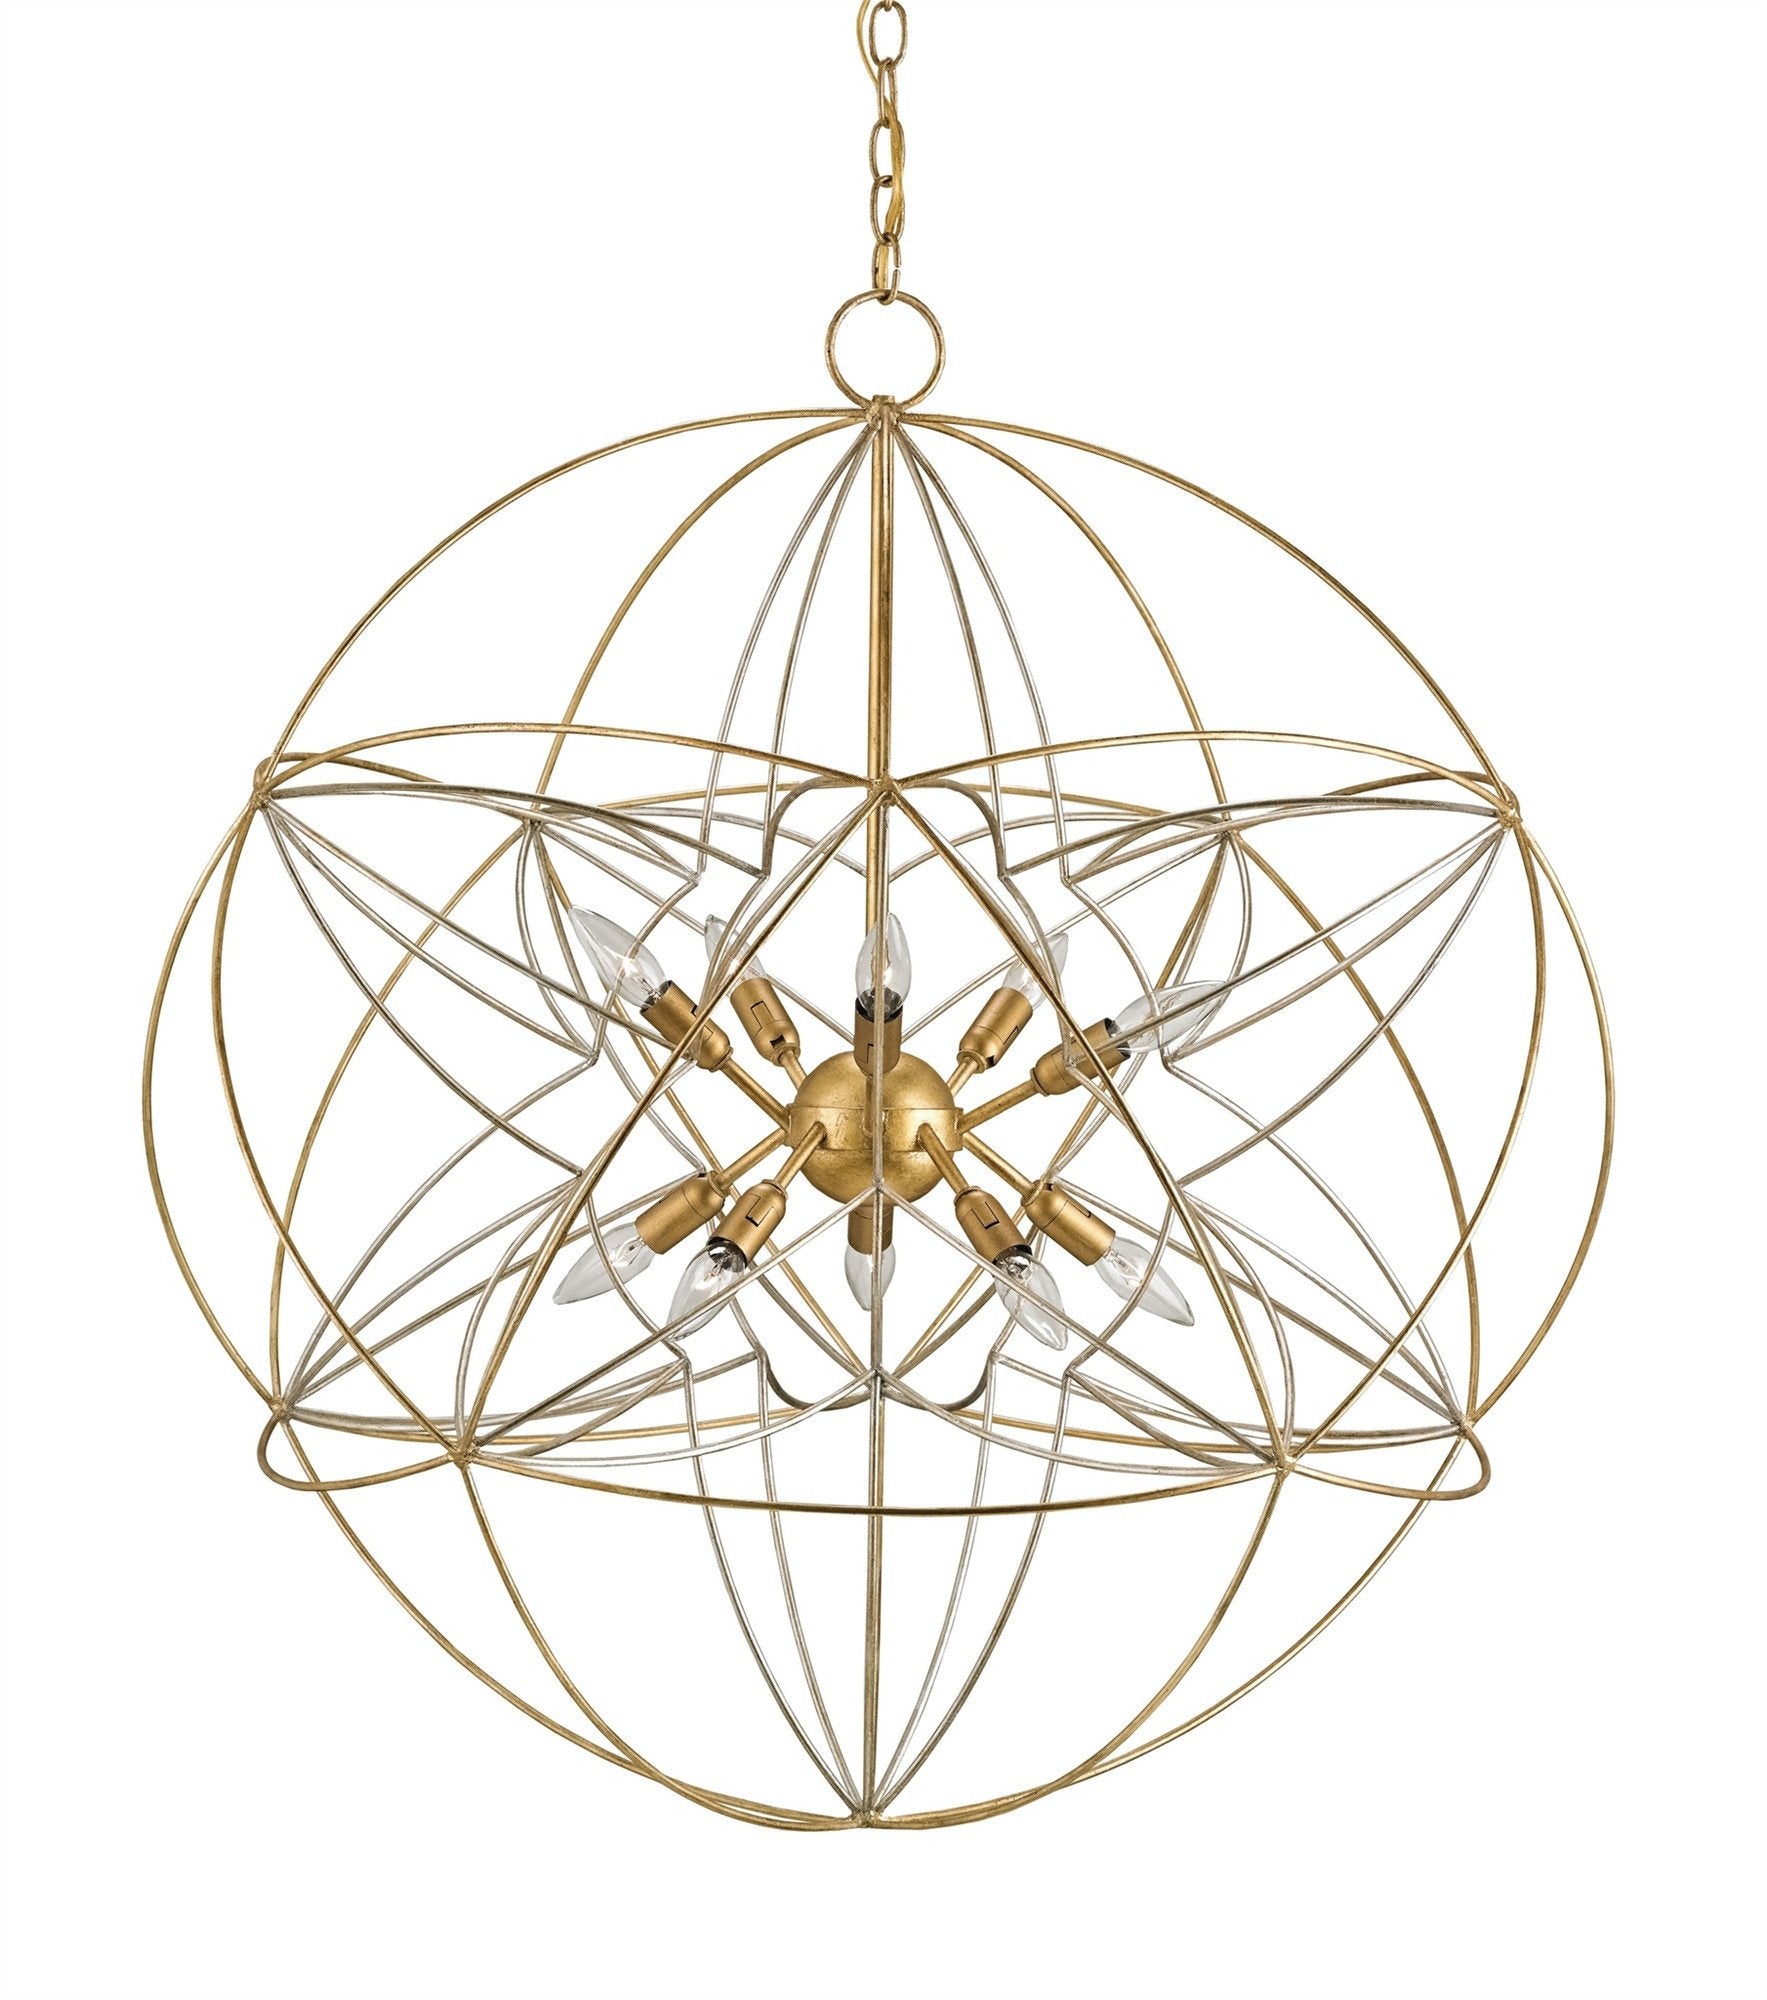 Zenda Orb Chandelier design by Currey and Company